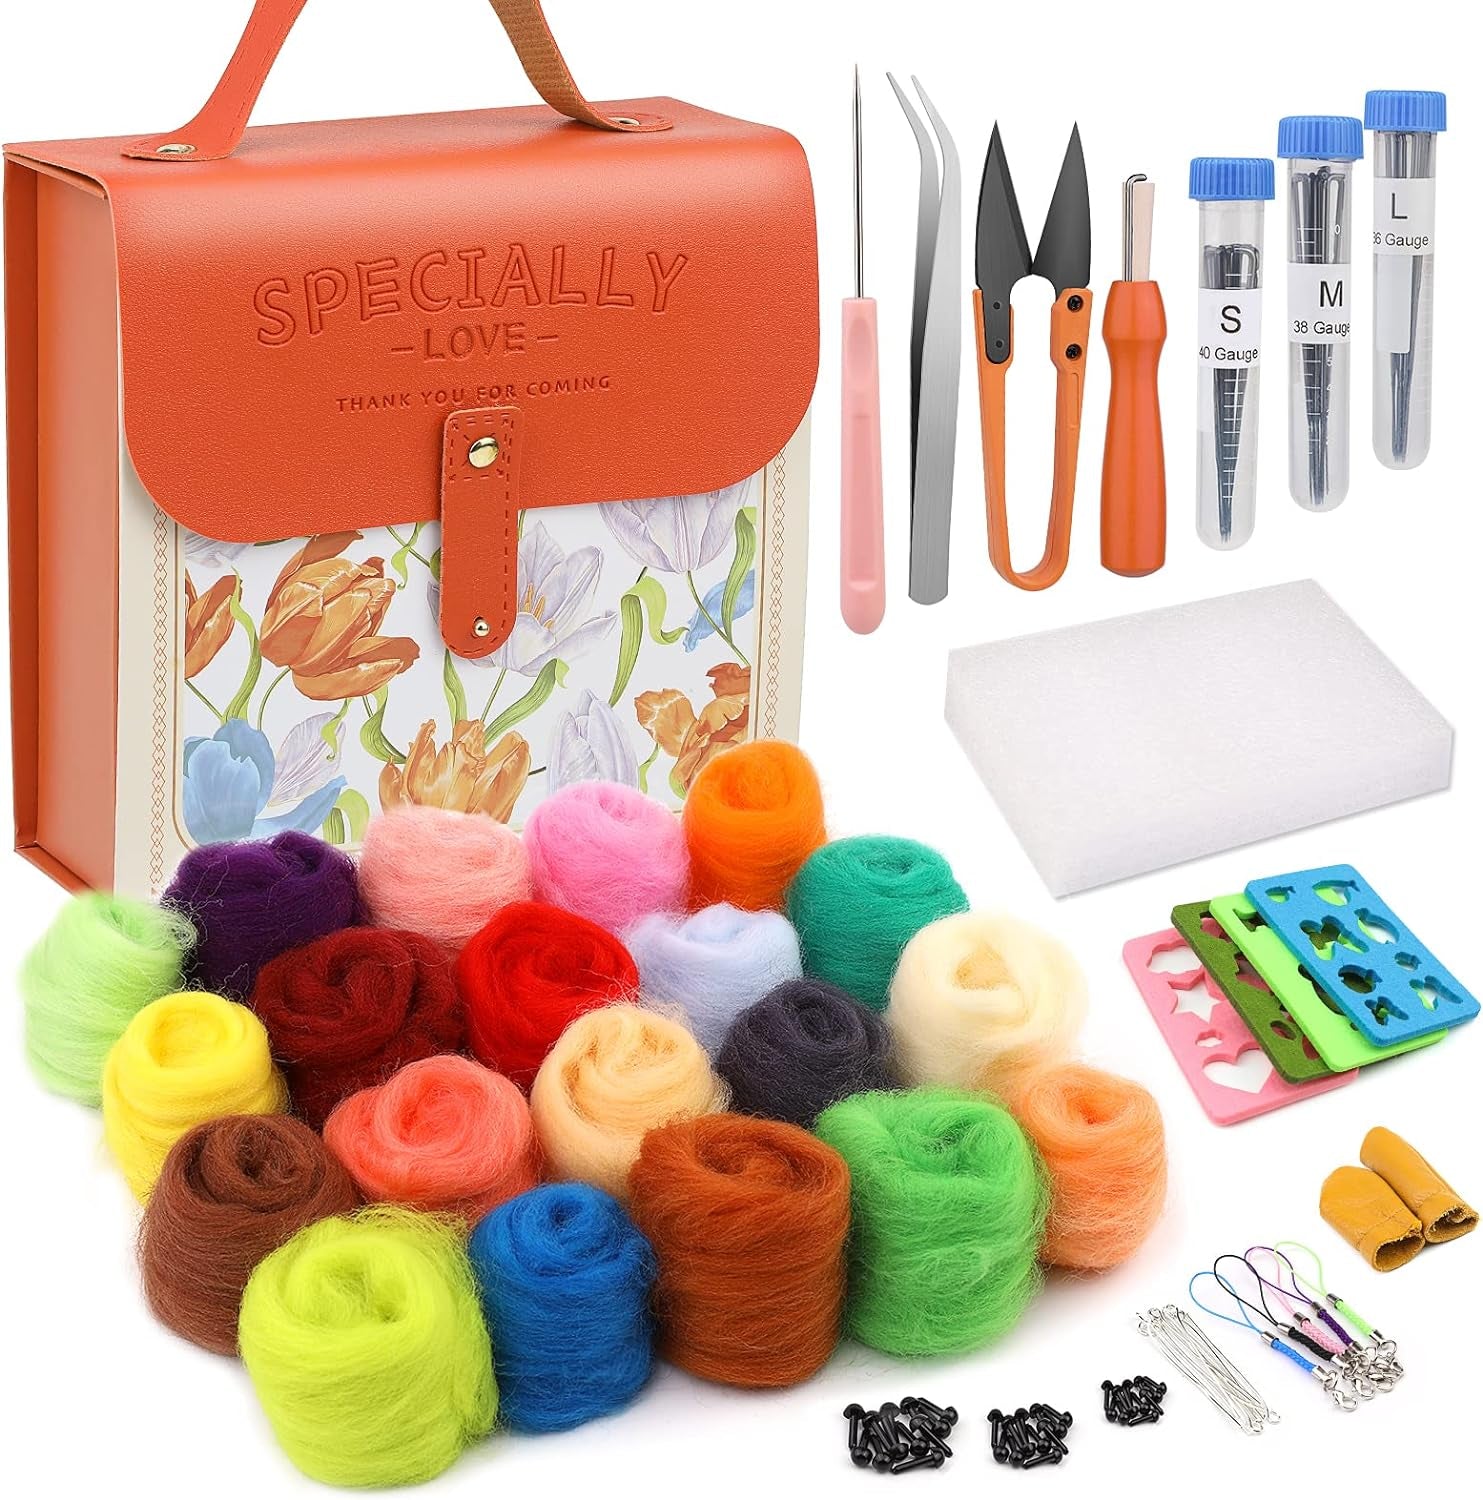 Needle Felting Starter Kit,Wool Roving 40 Colors Set, Wool Felt Tools with Instruction Included for Felted Animal Needle Felting Supplies